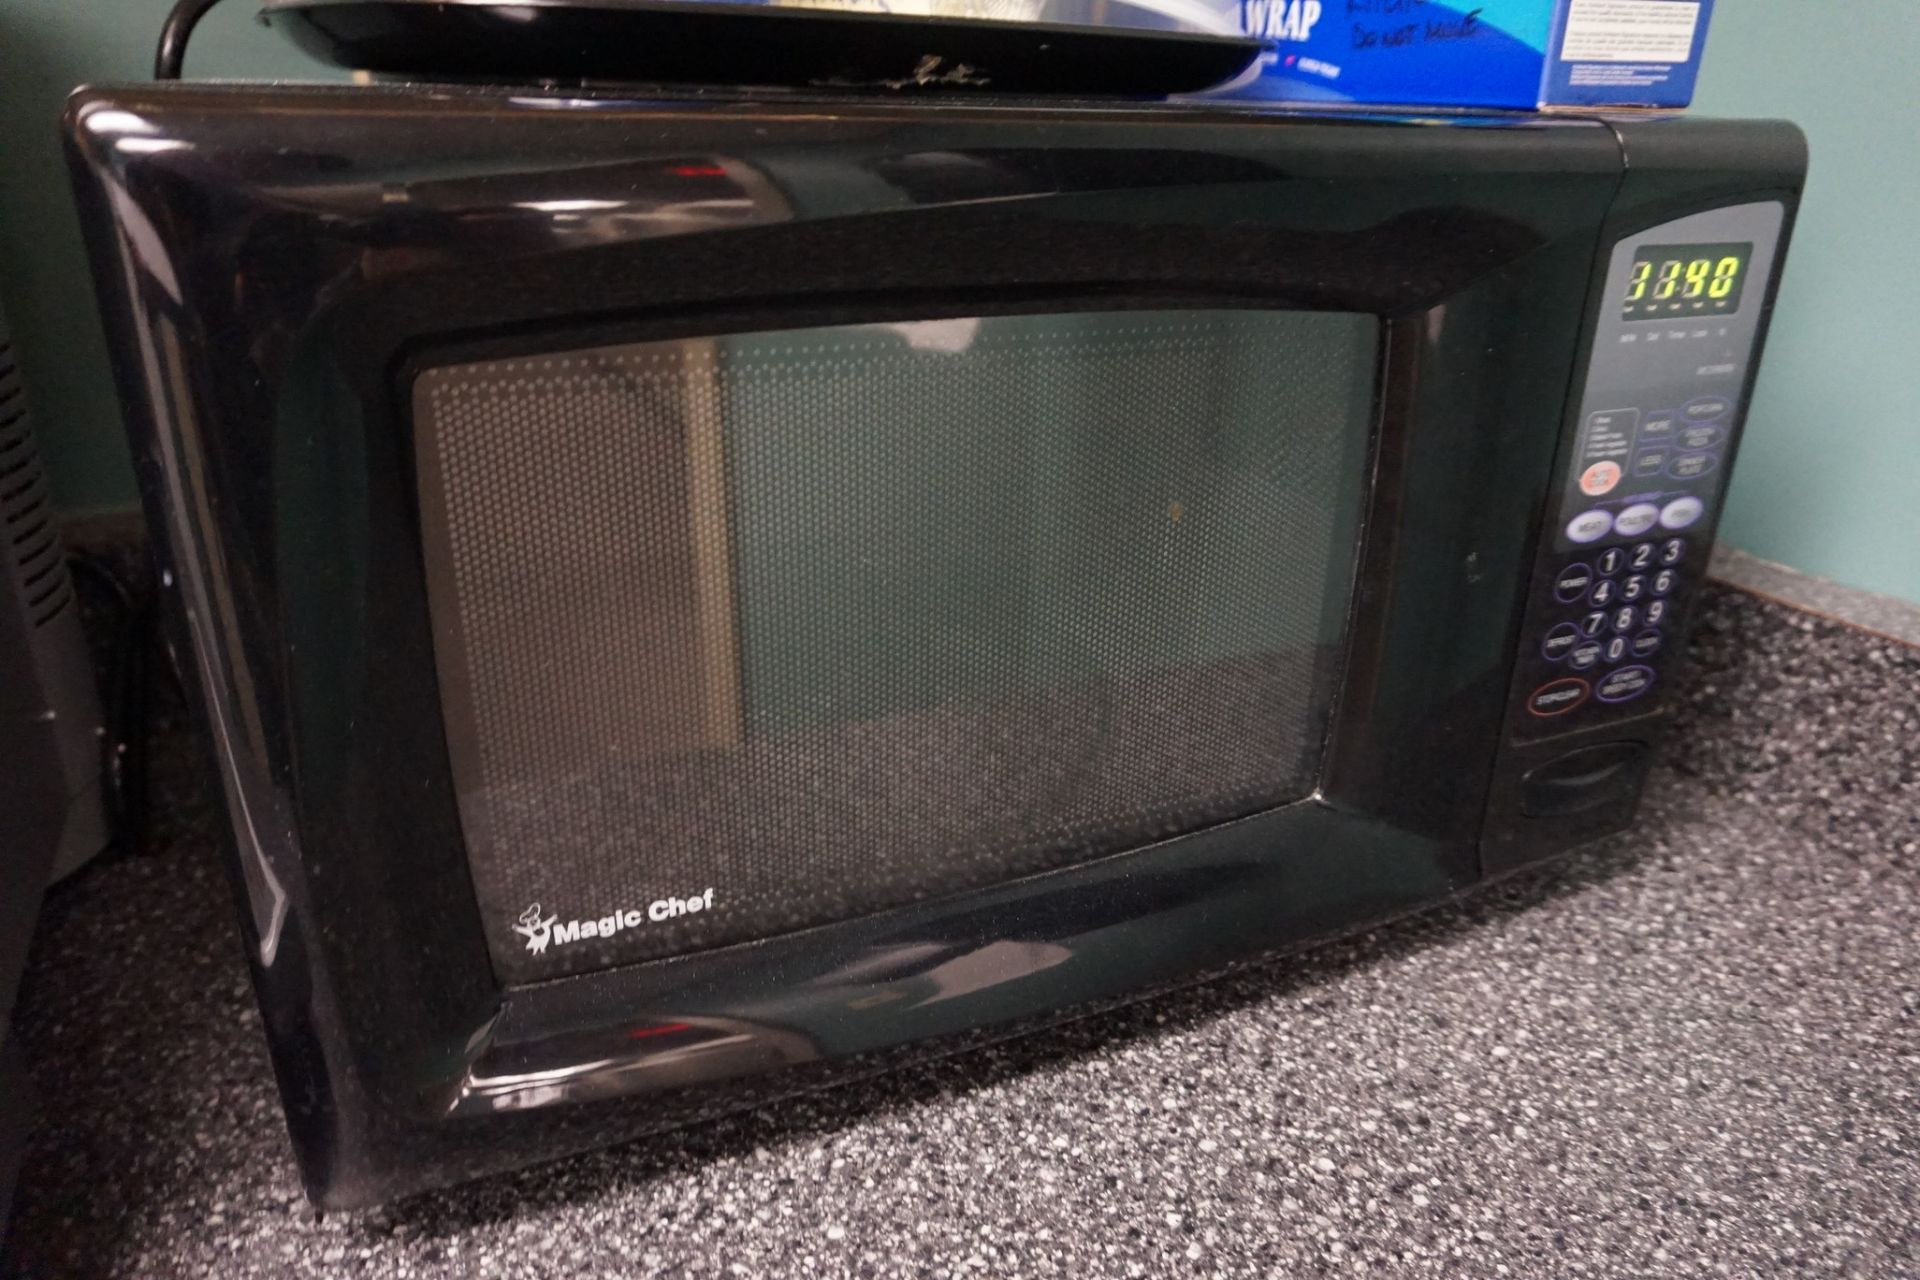 Kenmore Refrigerator with Microwave, Toaster Oven - Image 2 of 3